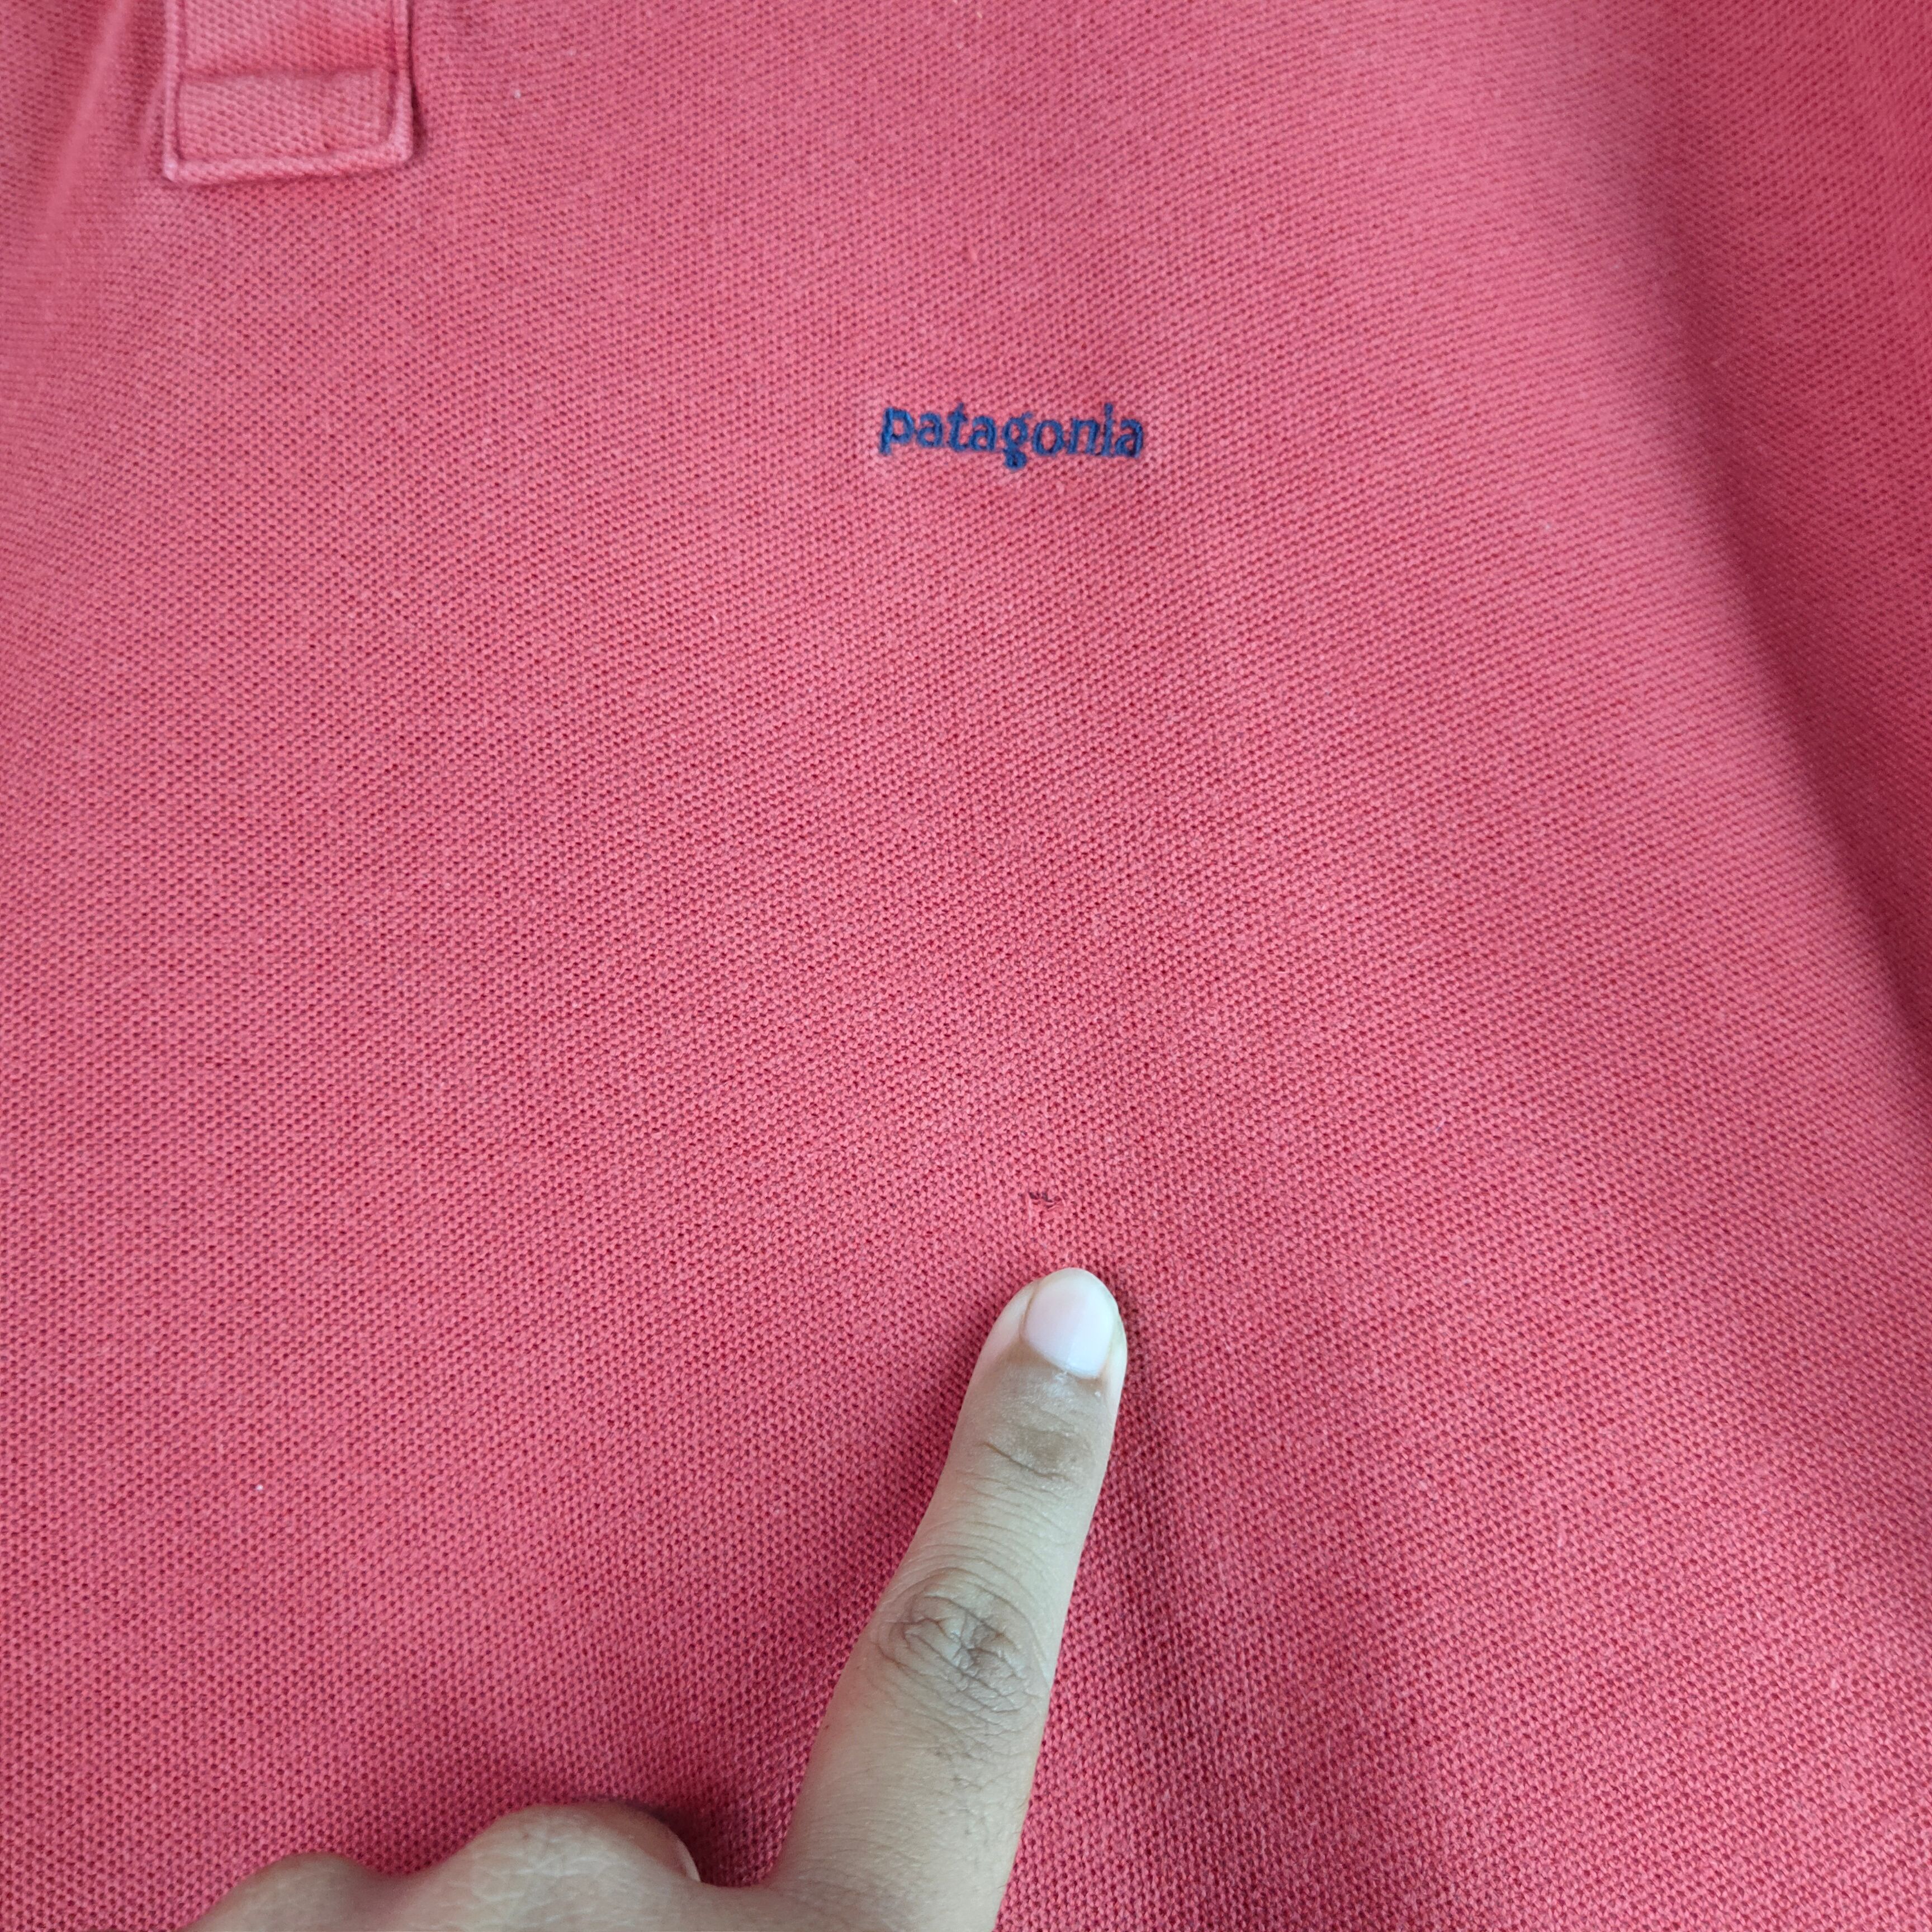 PATAGONIA Embroidery Small Spell Out Polo Shirt - 5